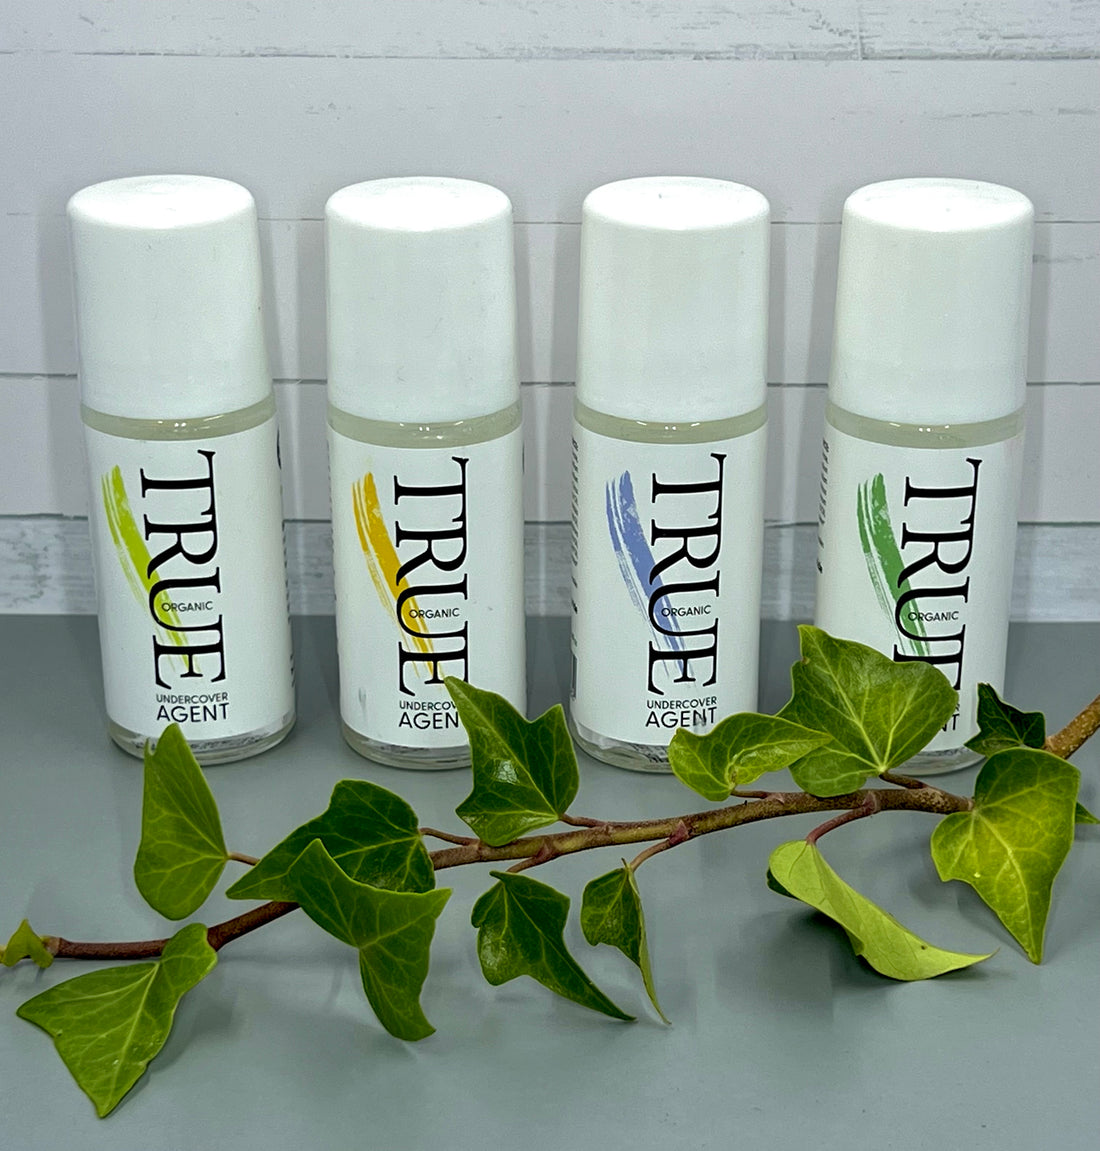 Undercover agent natural deodorant that actually works 